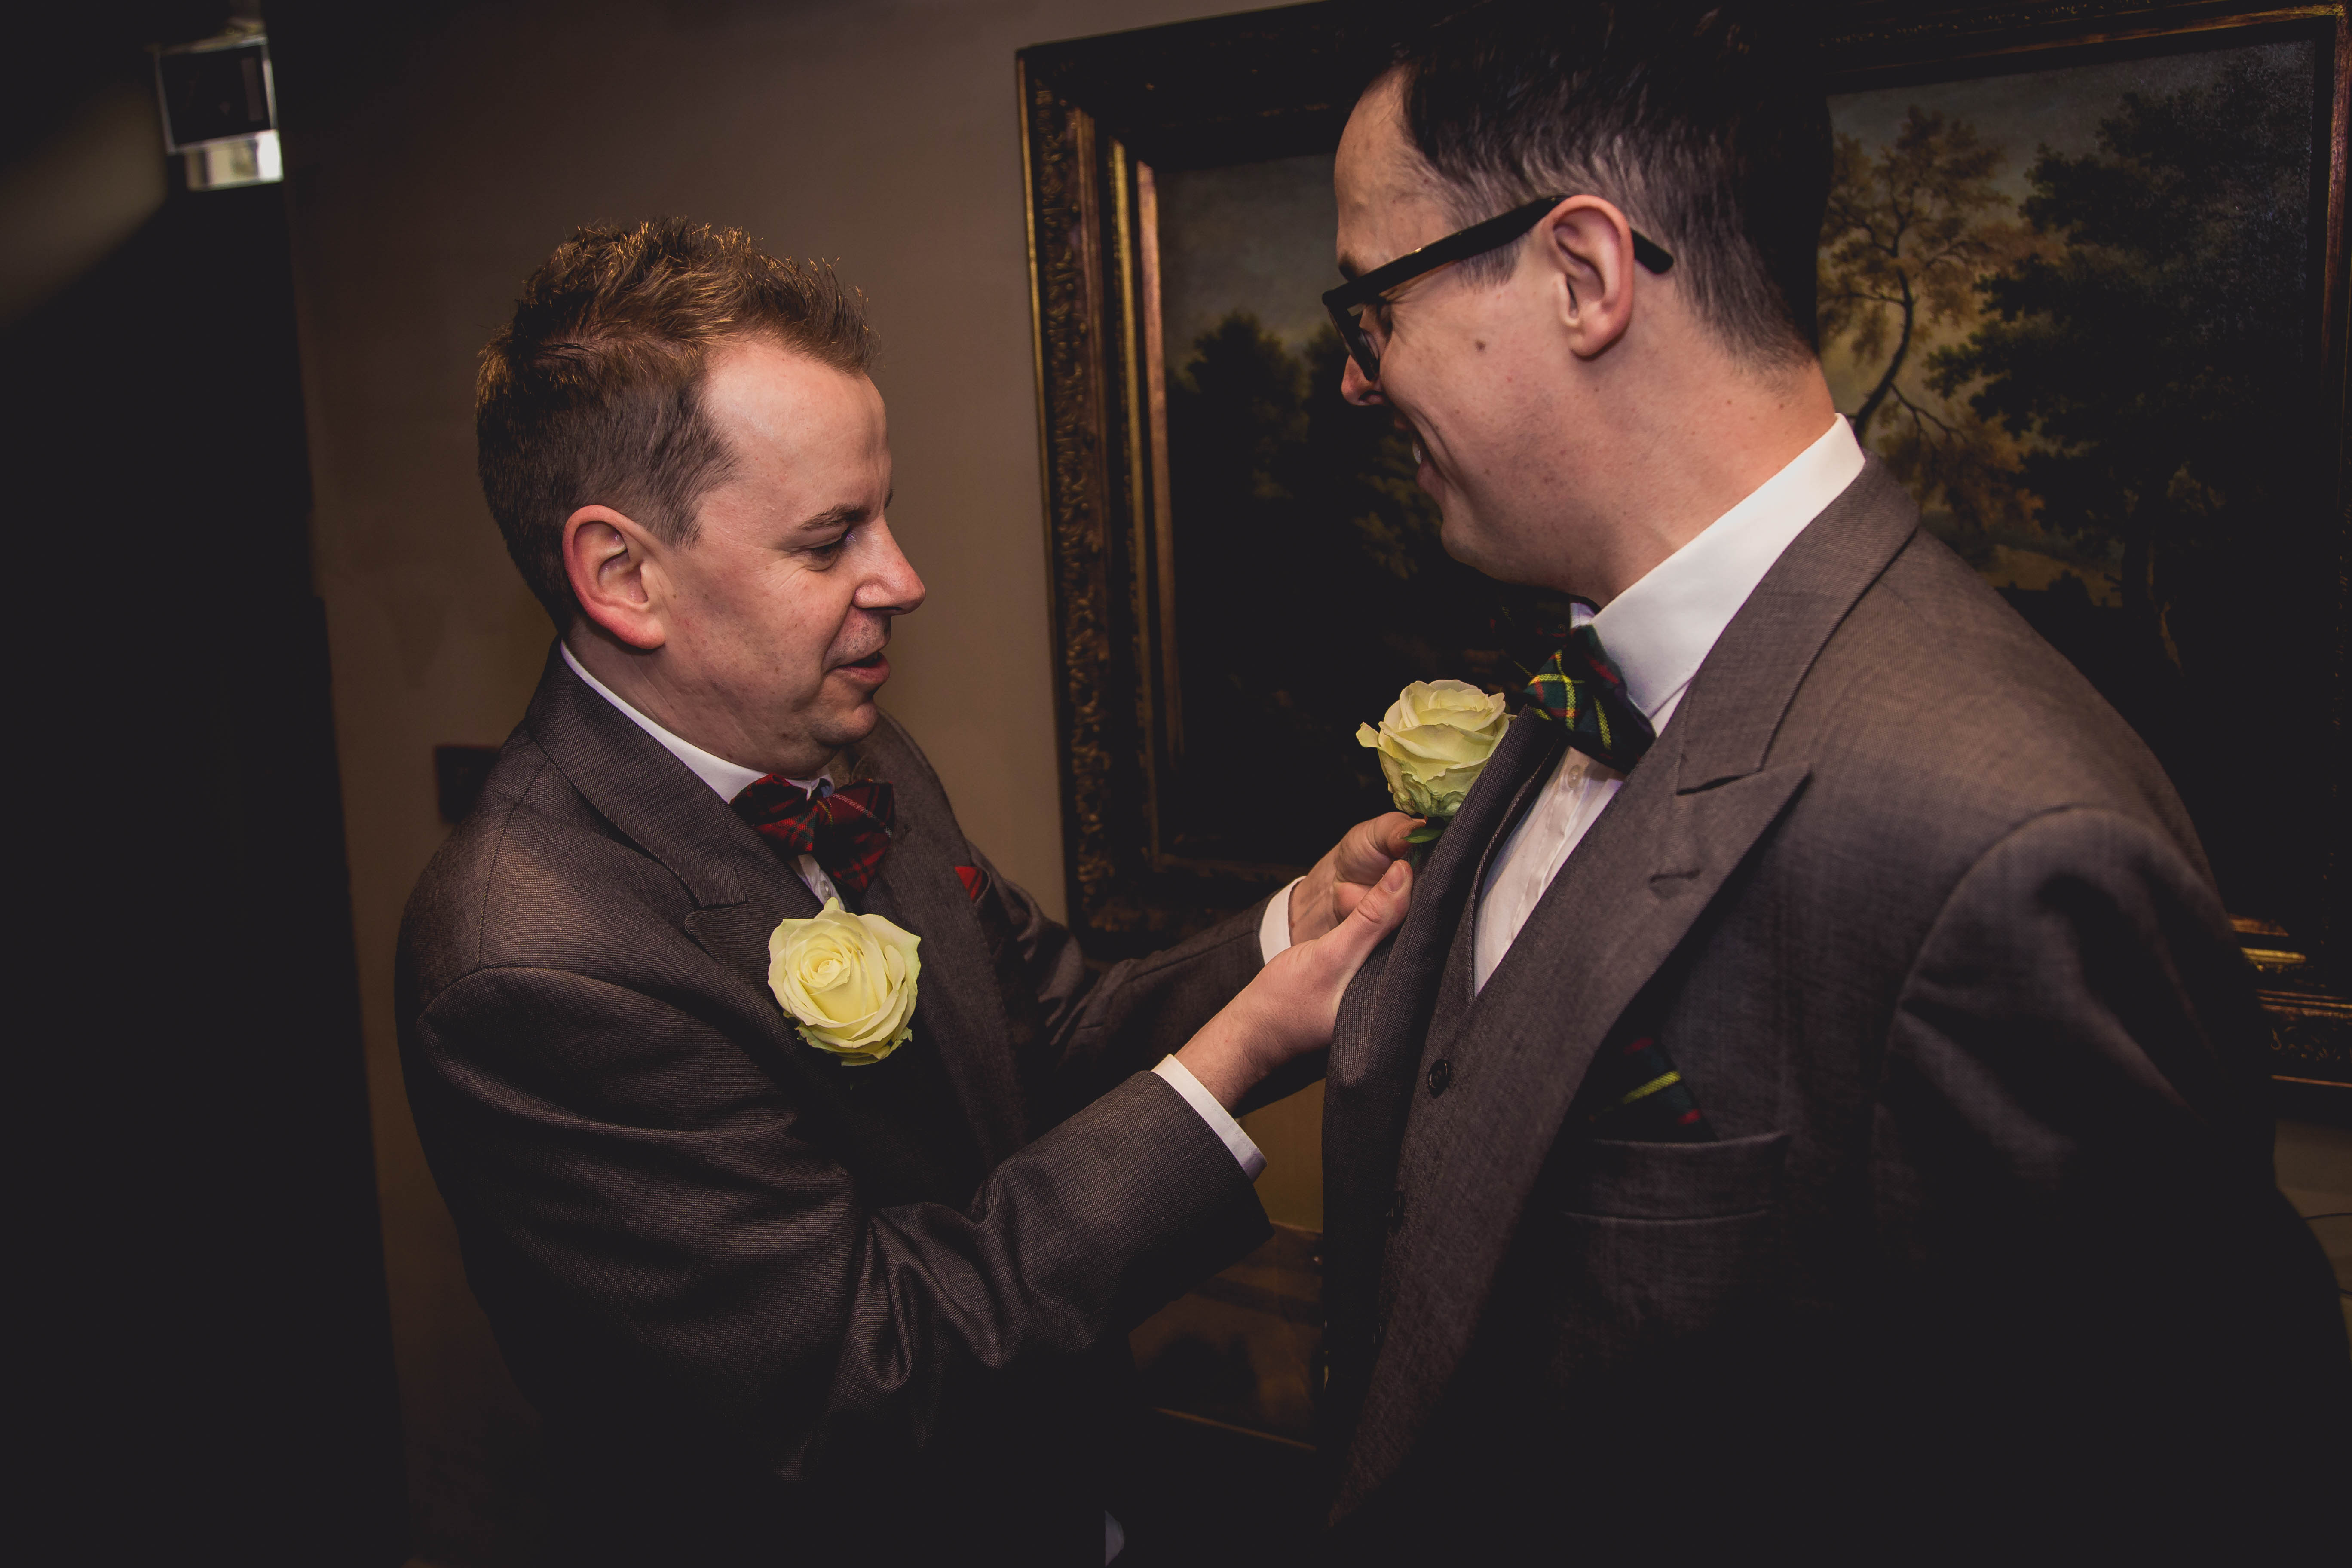 Positioning buttonholes at Sheffield Wedding 